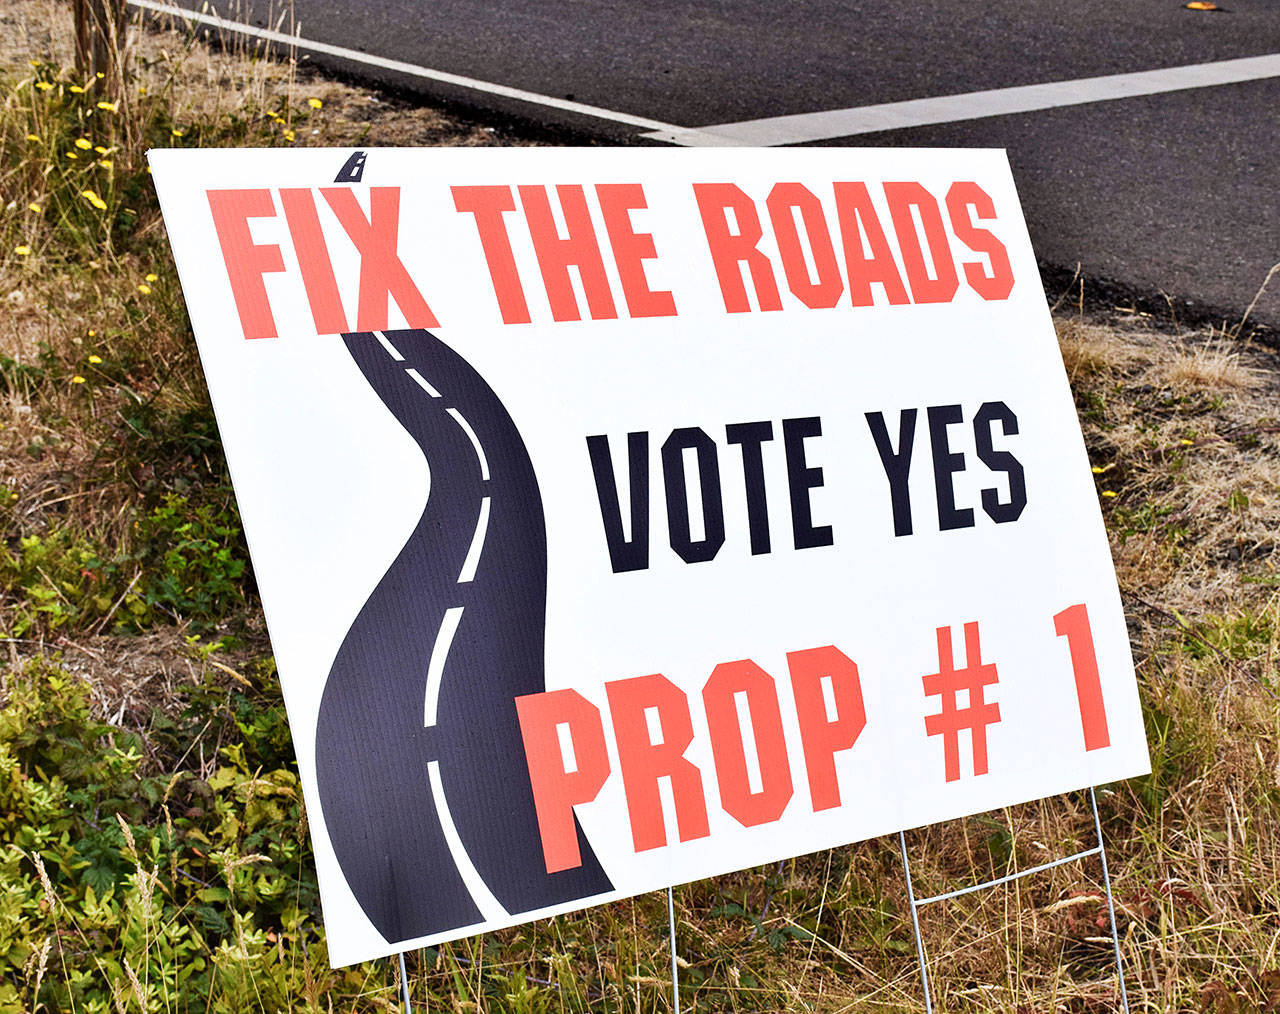 Ocean Shores voters narrowly approving Prop 1 sales tax for roads